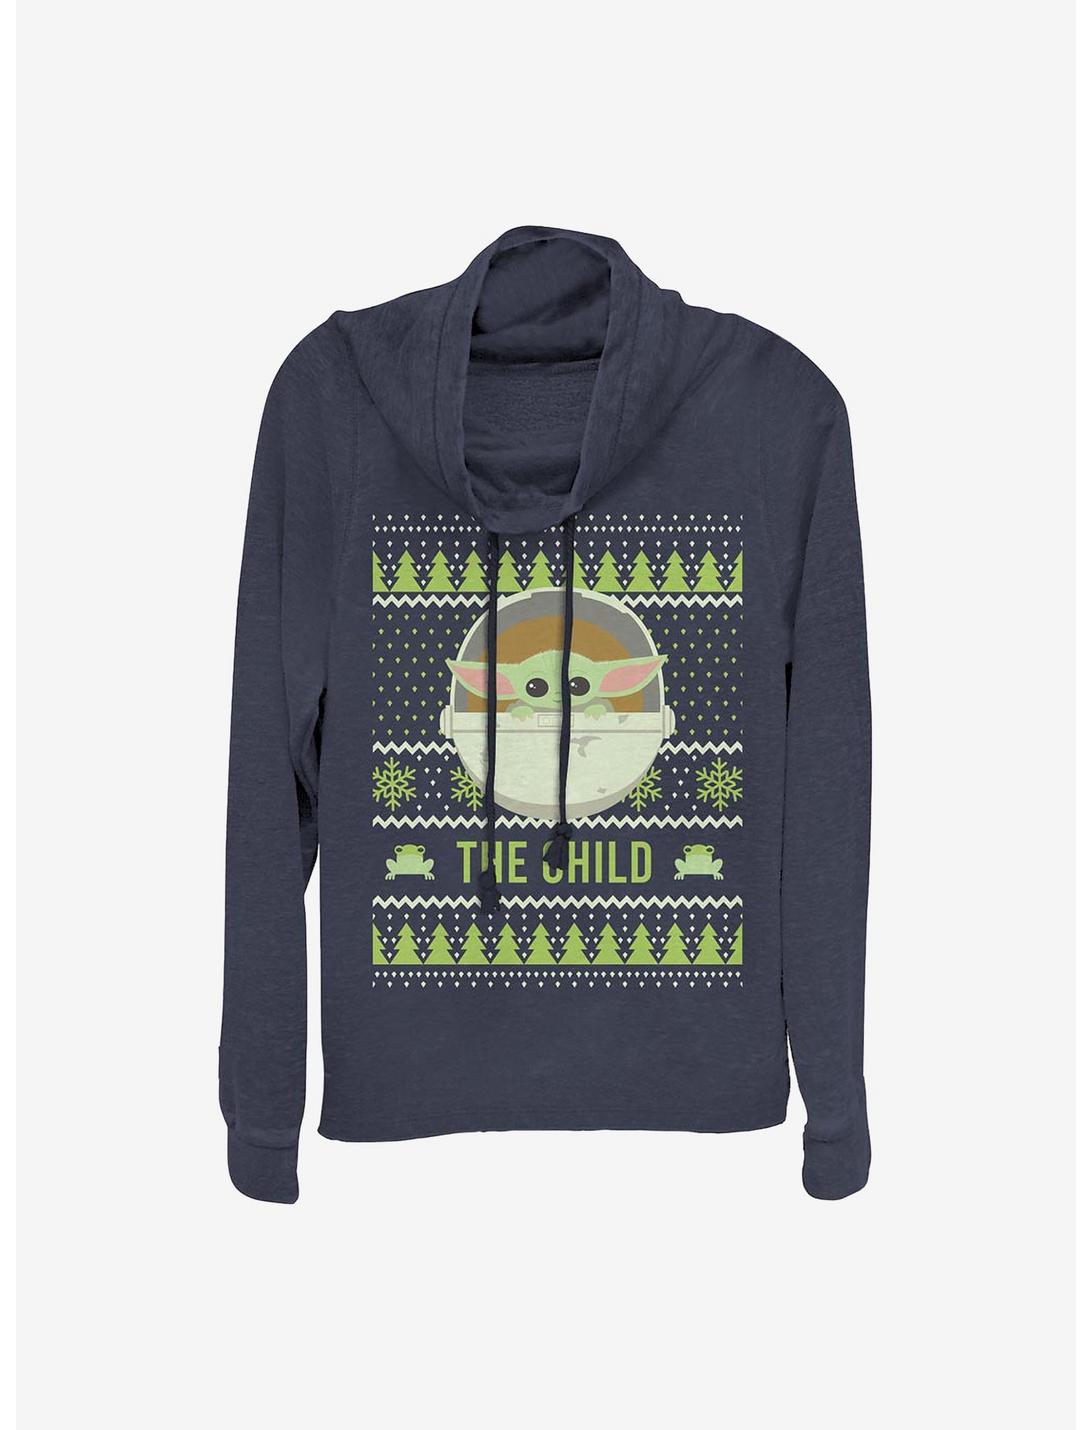 Star Wars The Mandalorian The Cute Holiday Pattern Cowl Neck Long-Sleeve Womens Top, NAVY, hi-res